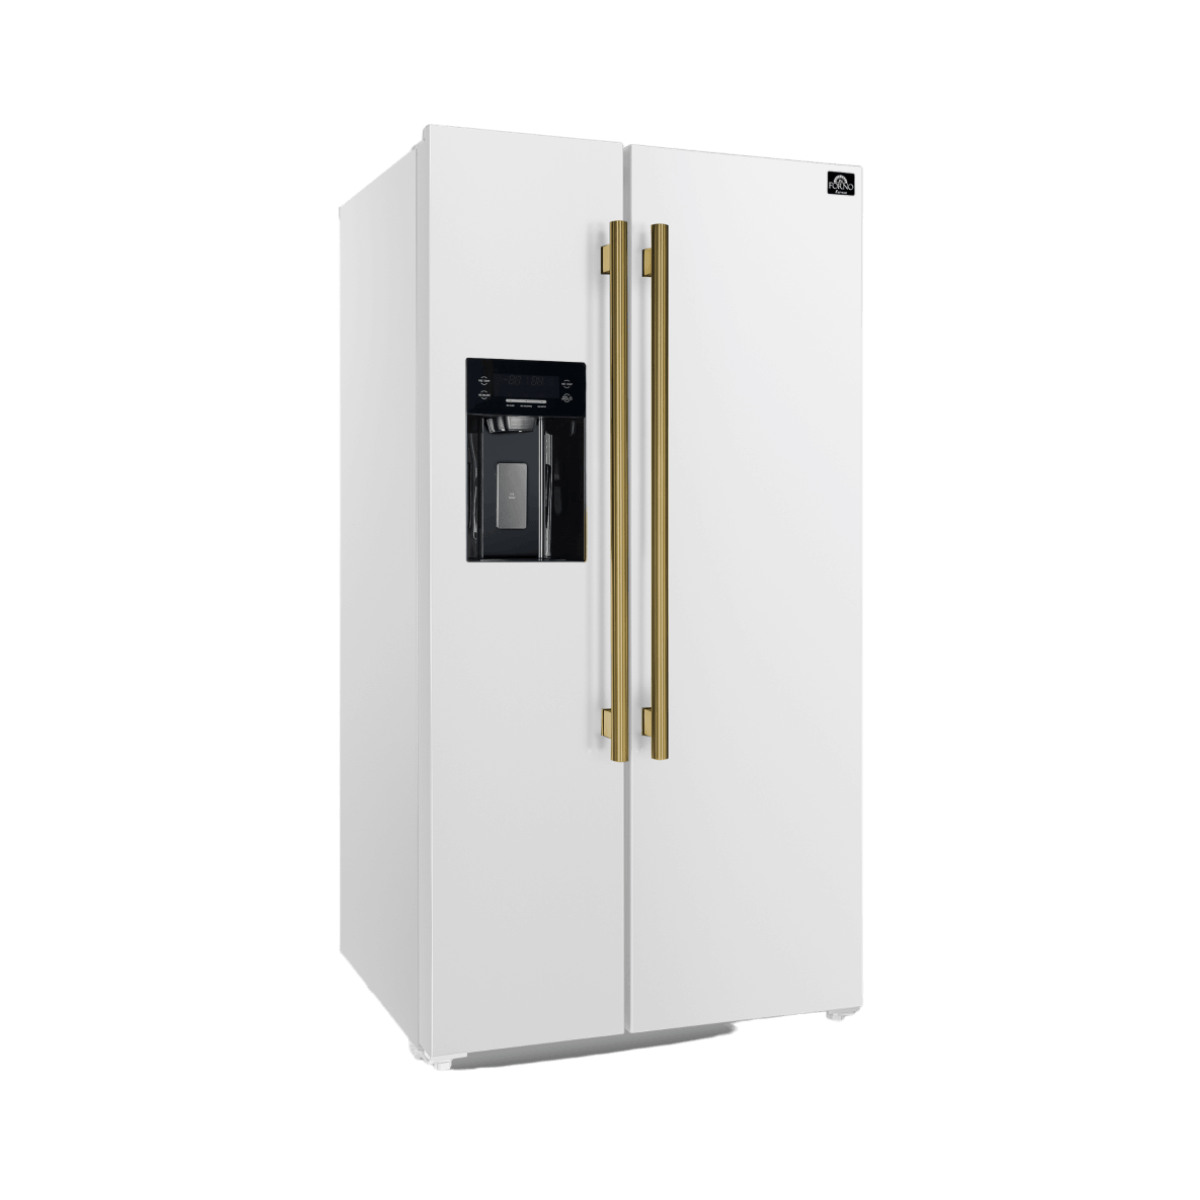 Forno Espresso 36" 20 Cu. Ft. Side-By-Side Refrigerator with Water and Ice Dispenser in White with Antique Brass Handles Refrigerator FFRBI1844-36WHT Luxury Appliances Direct